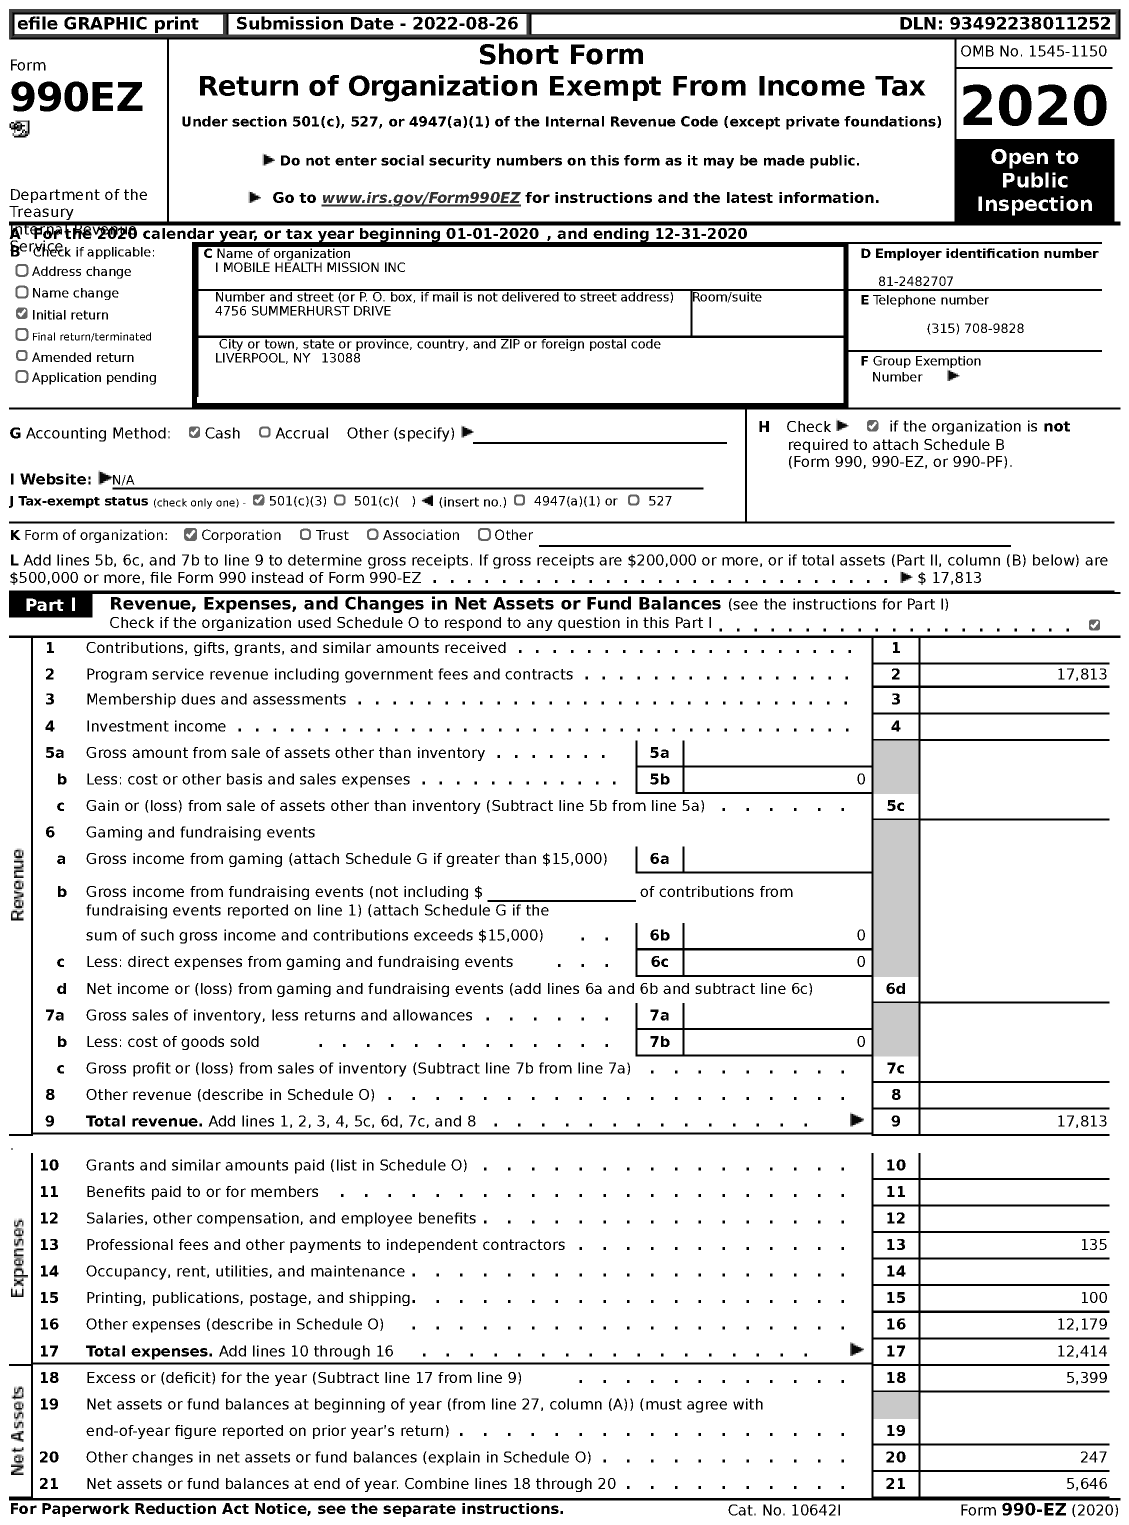 Image of first page of 2020 Form 990EZ for I Mobile Health Mission